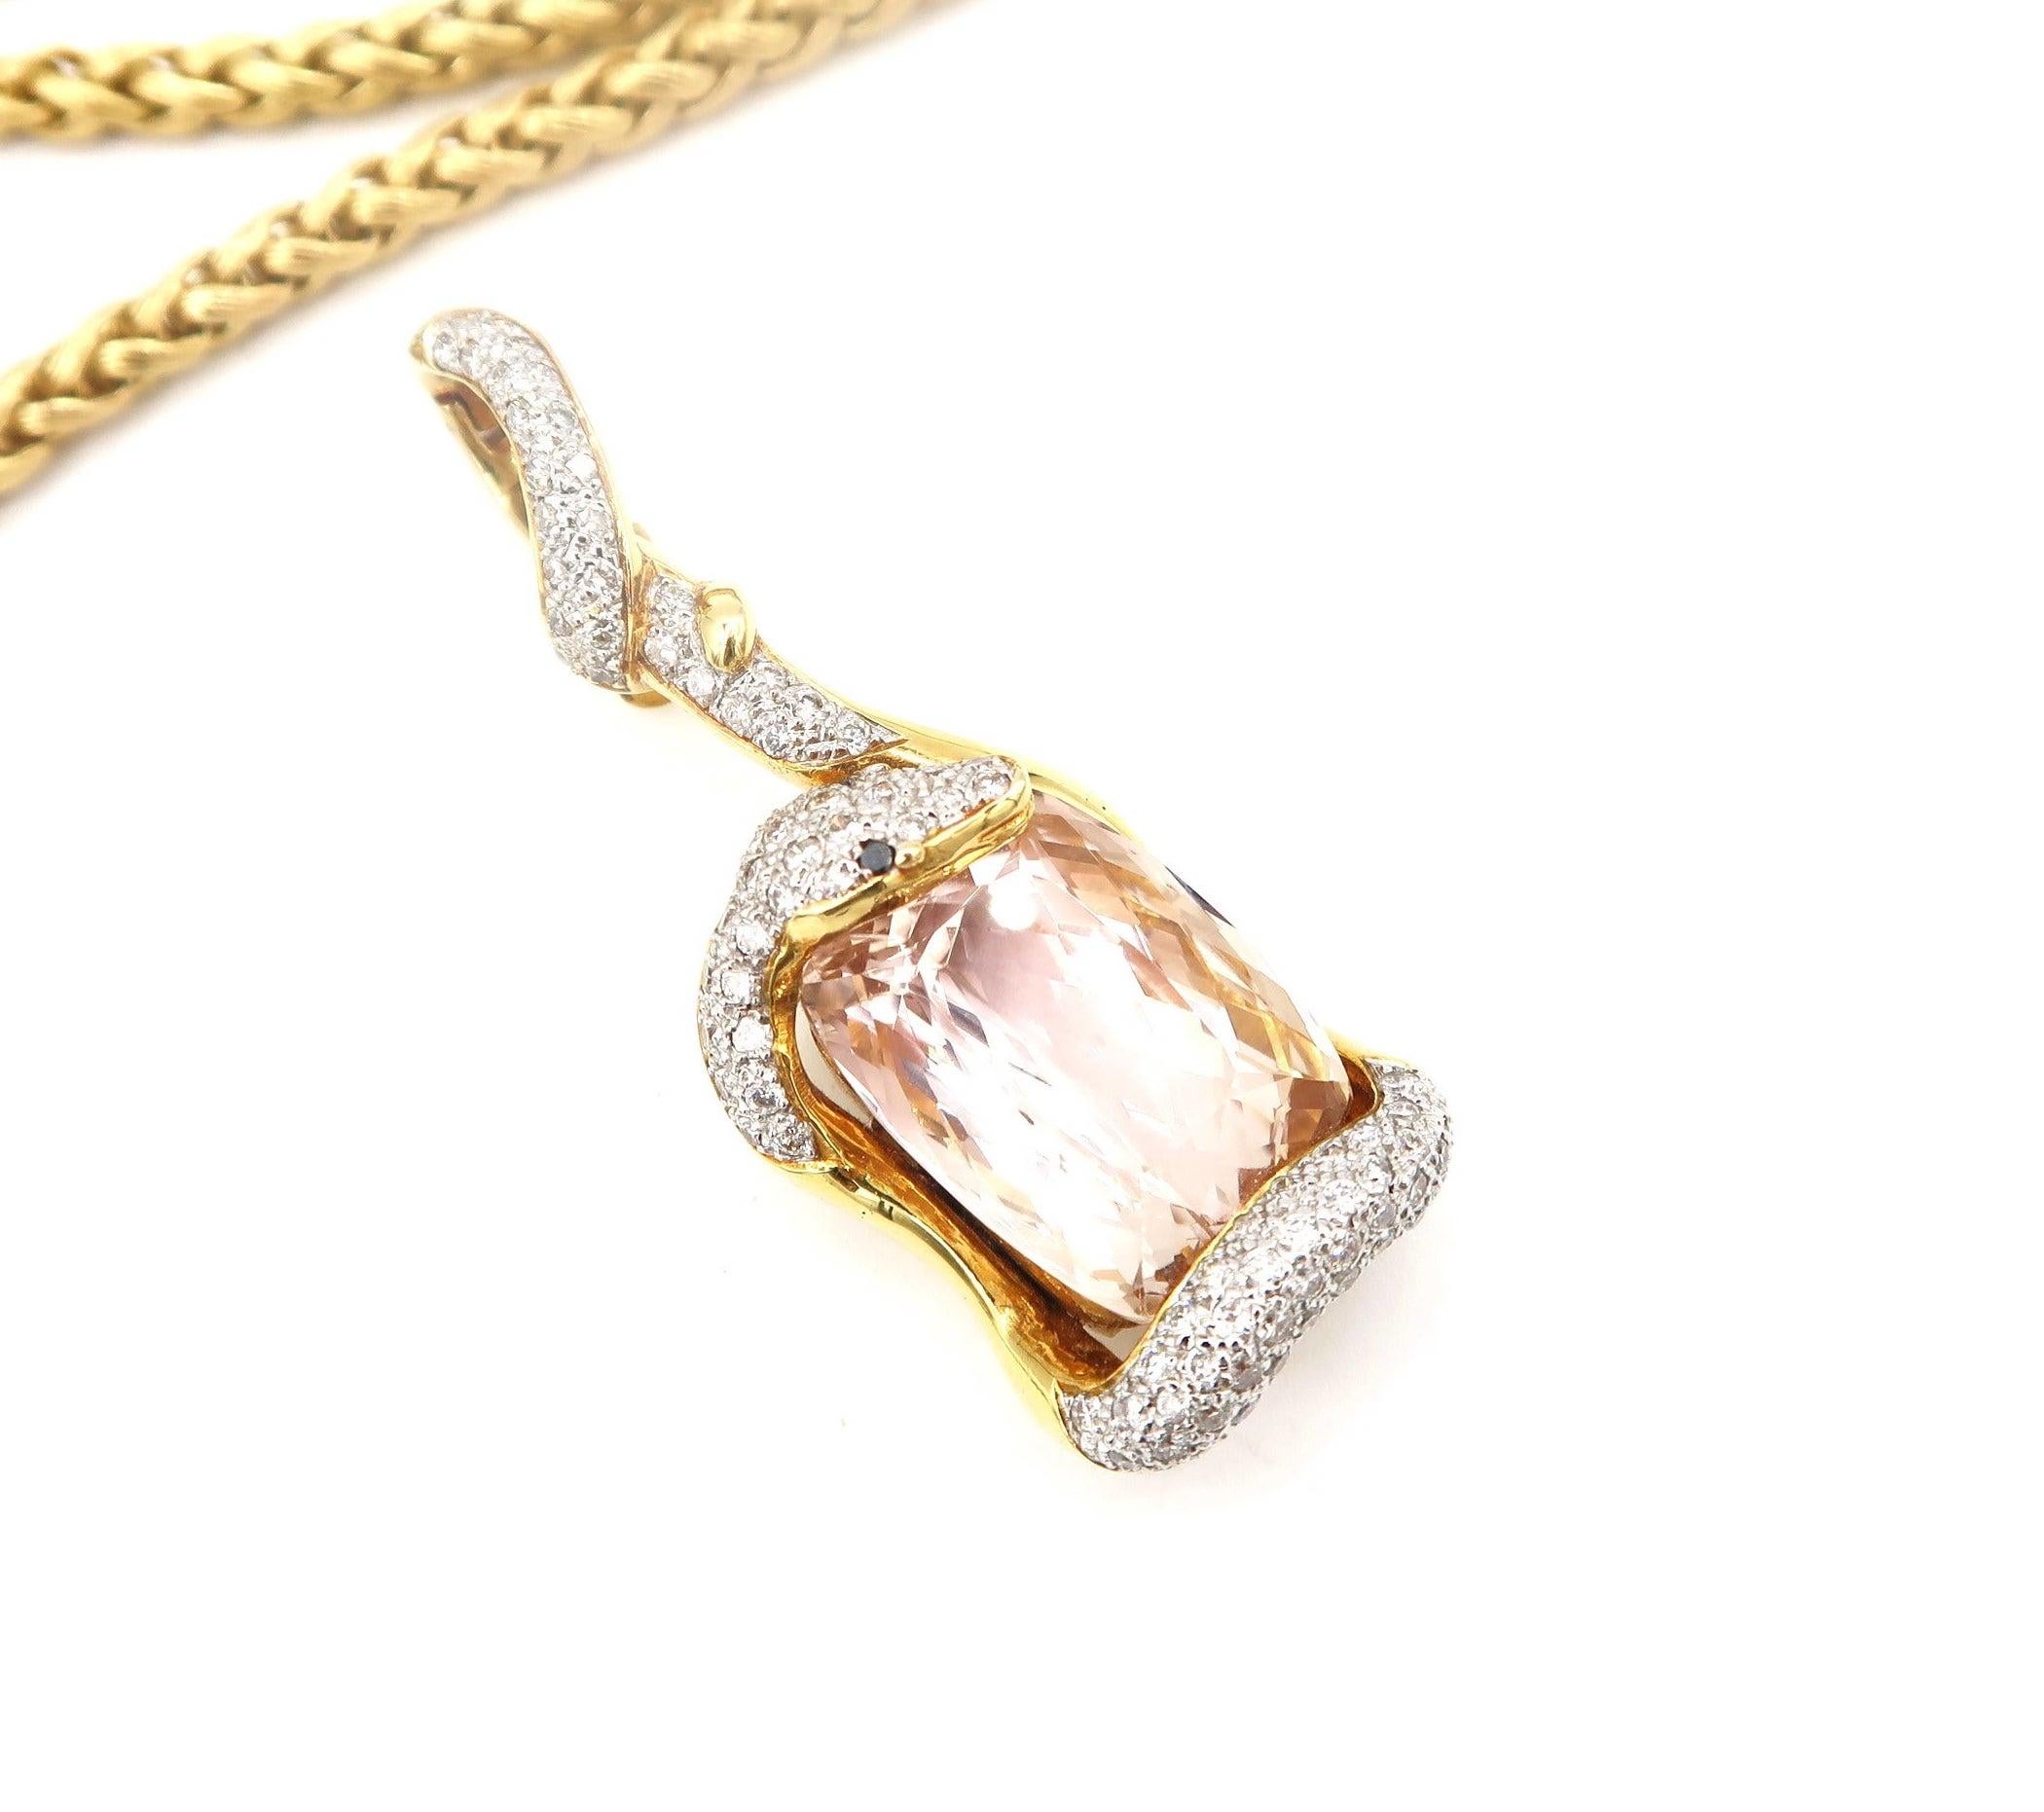 Serpentine 34.92 Carat Oval Kunzite and Diamond Pendant
Kunzite: 34.92 ct
Diamond: 1.80 ct
Black Diamond: 0.02 ct
Gold: 18K, 26.43g
Dimensions: 6cm x 2cm

Silk-Finished 18 Karat Gold Chain
Length: 35.75 inches
Gold: 18K, 65.469 g